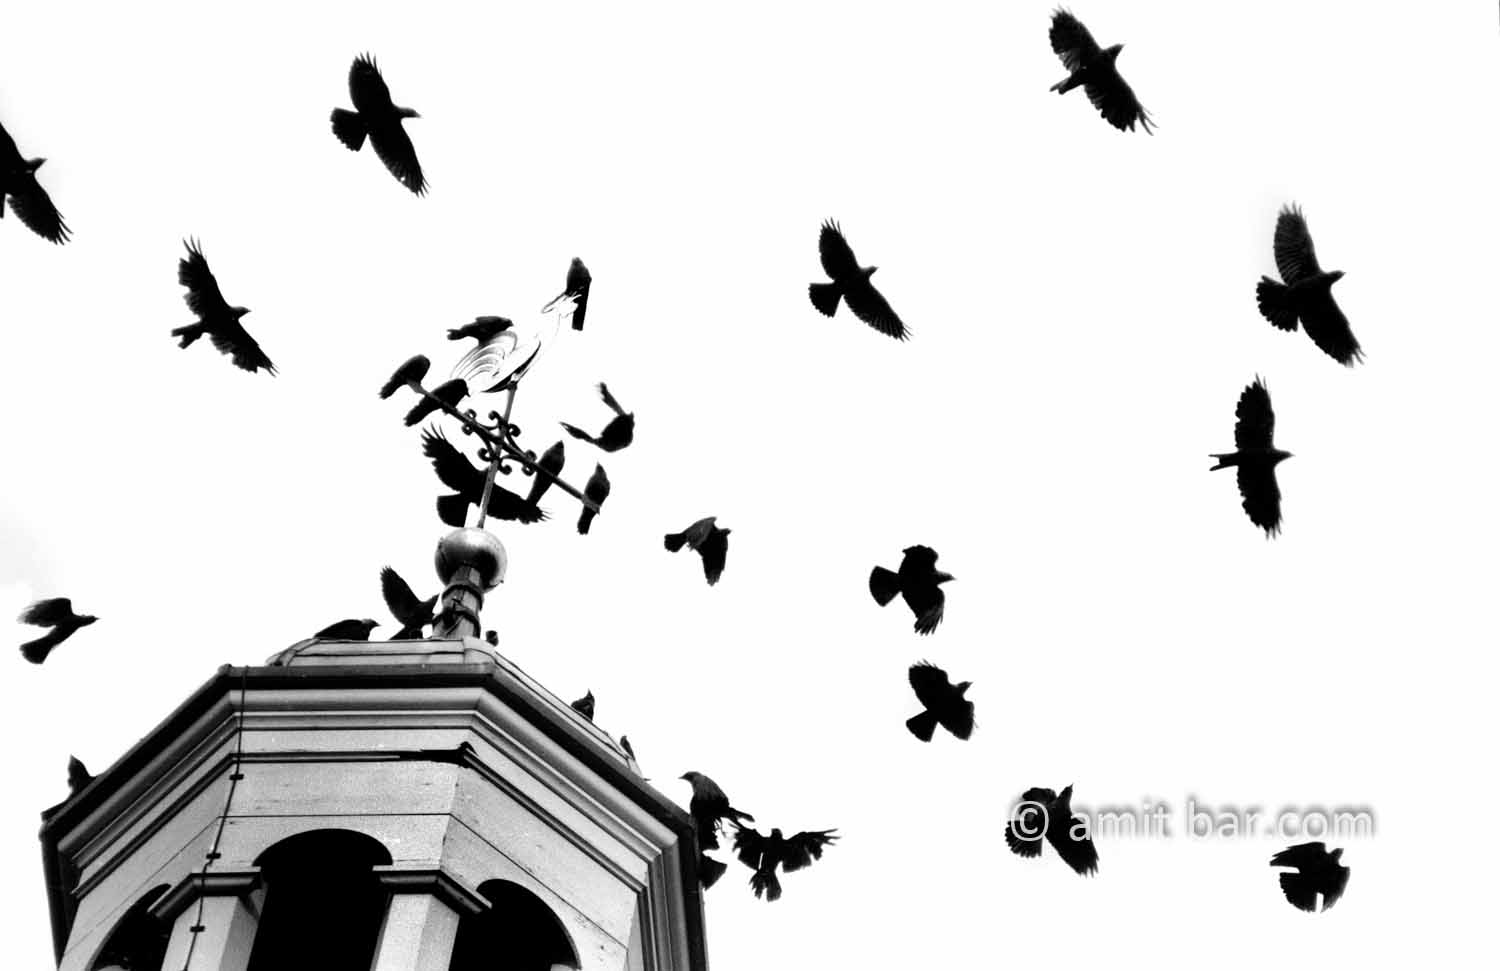 The birds: Crows are flying around the church-tower